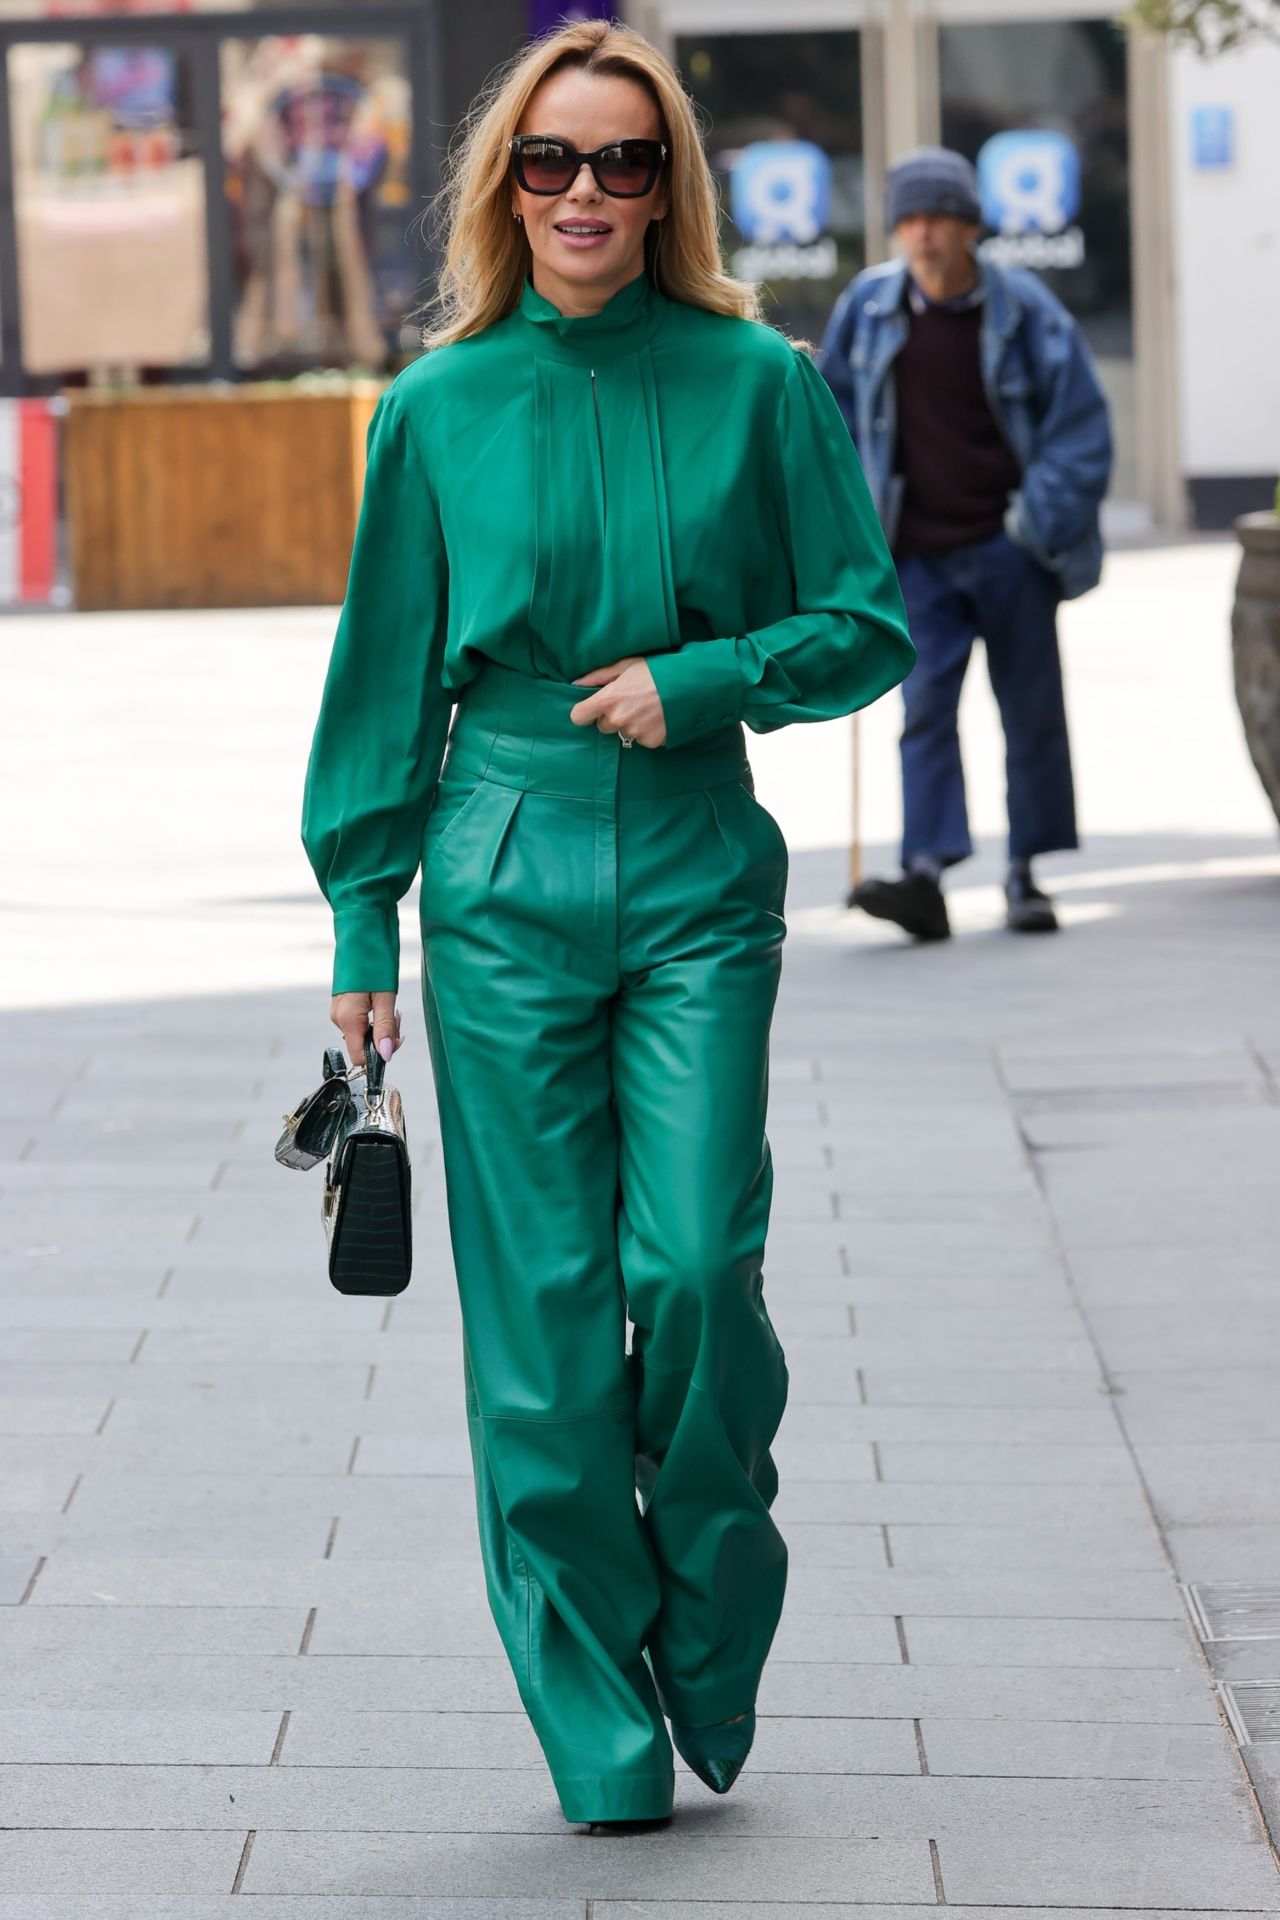 Amanda Holden in Green Leather Trousers and Figure-Hugging Shirt ...